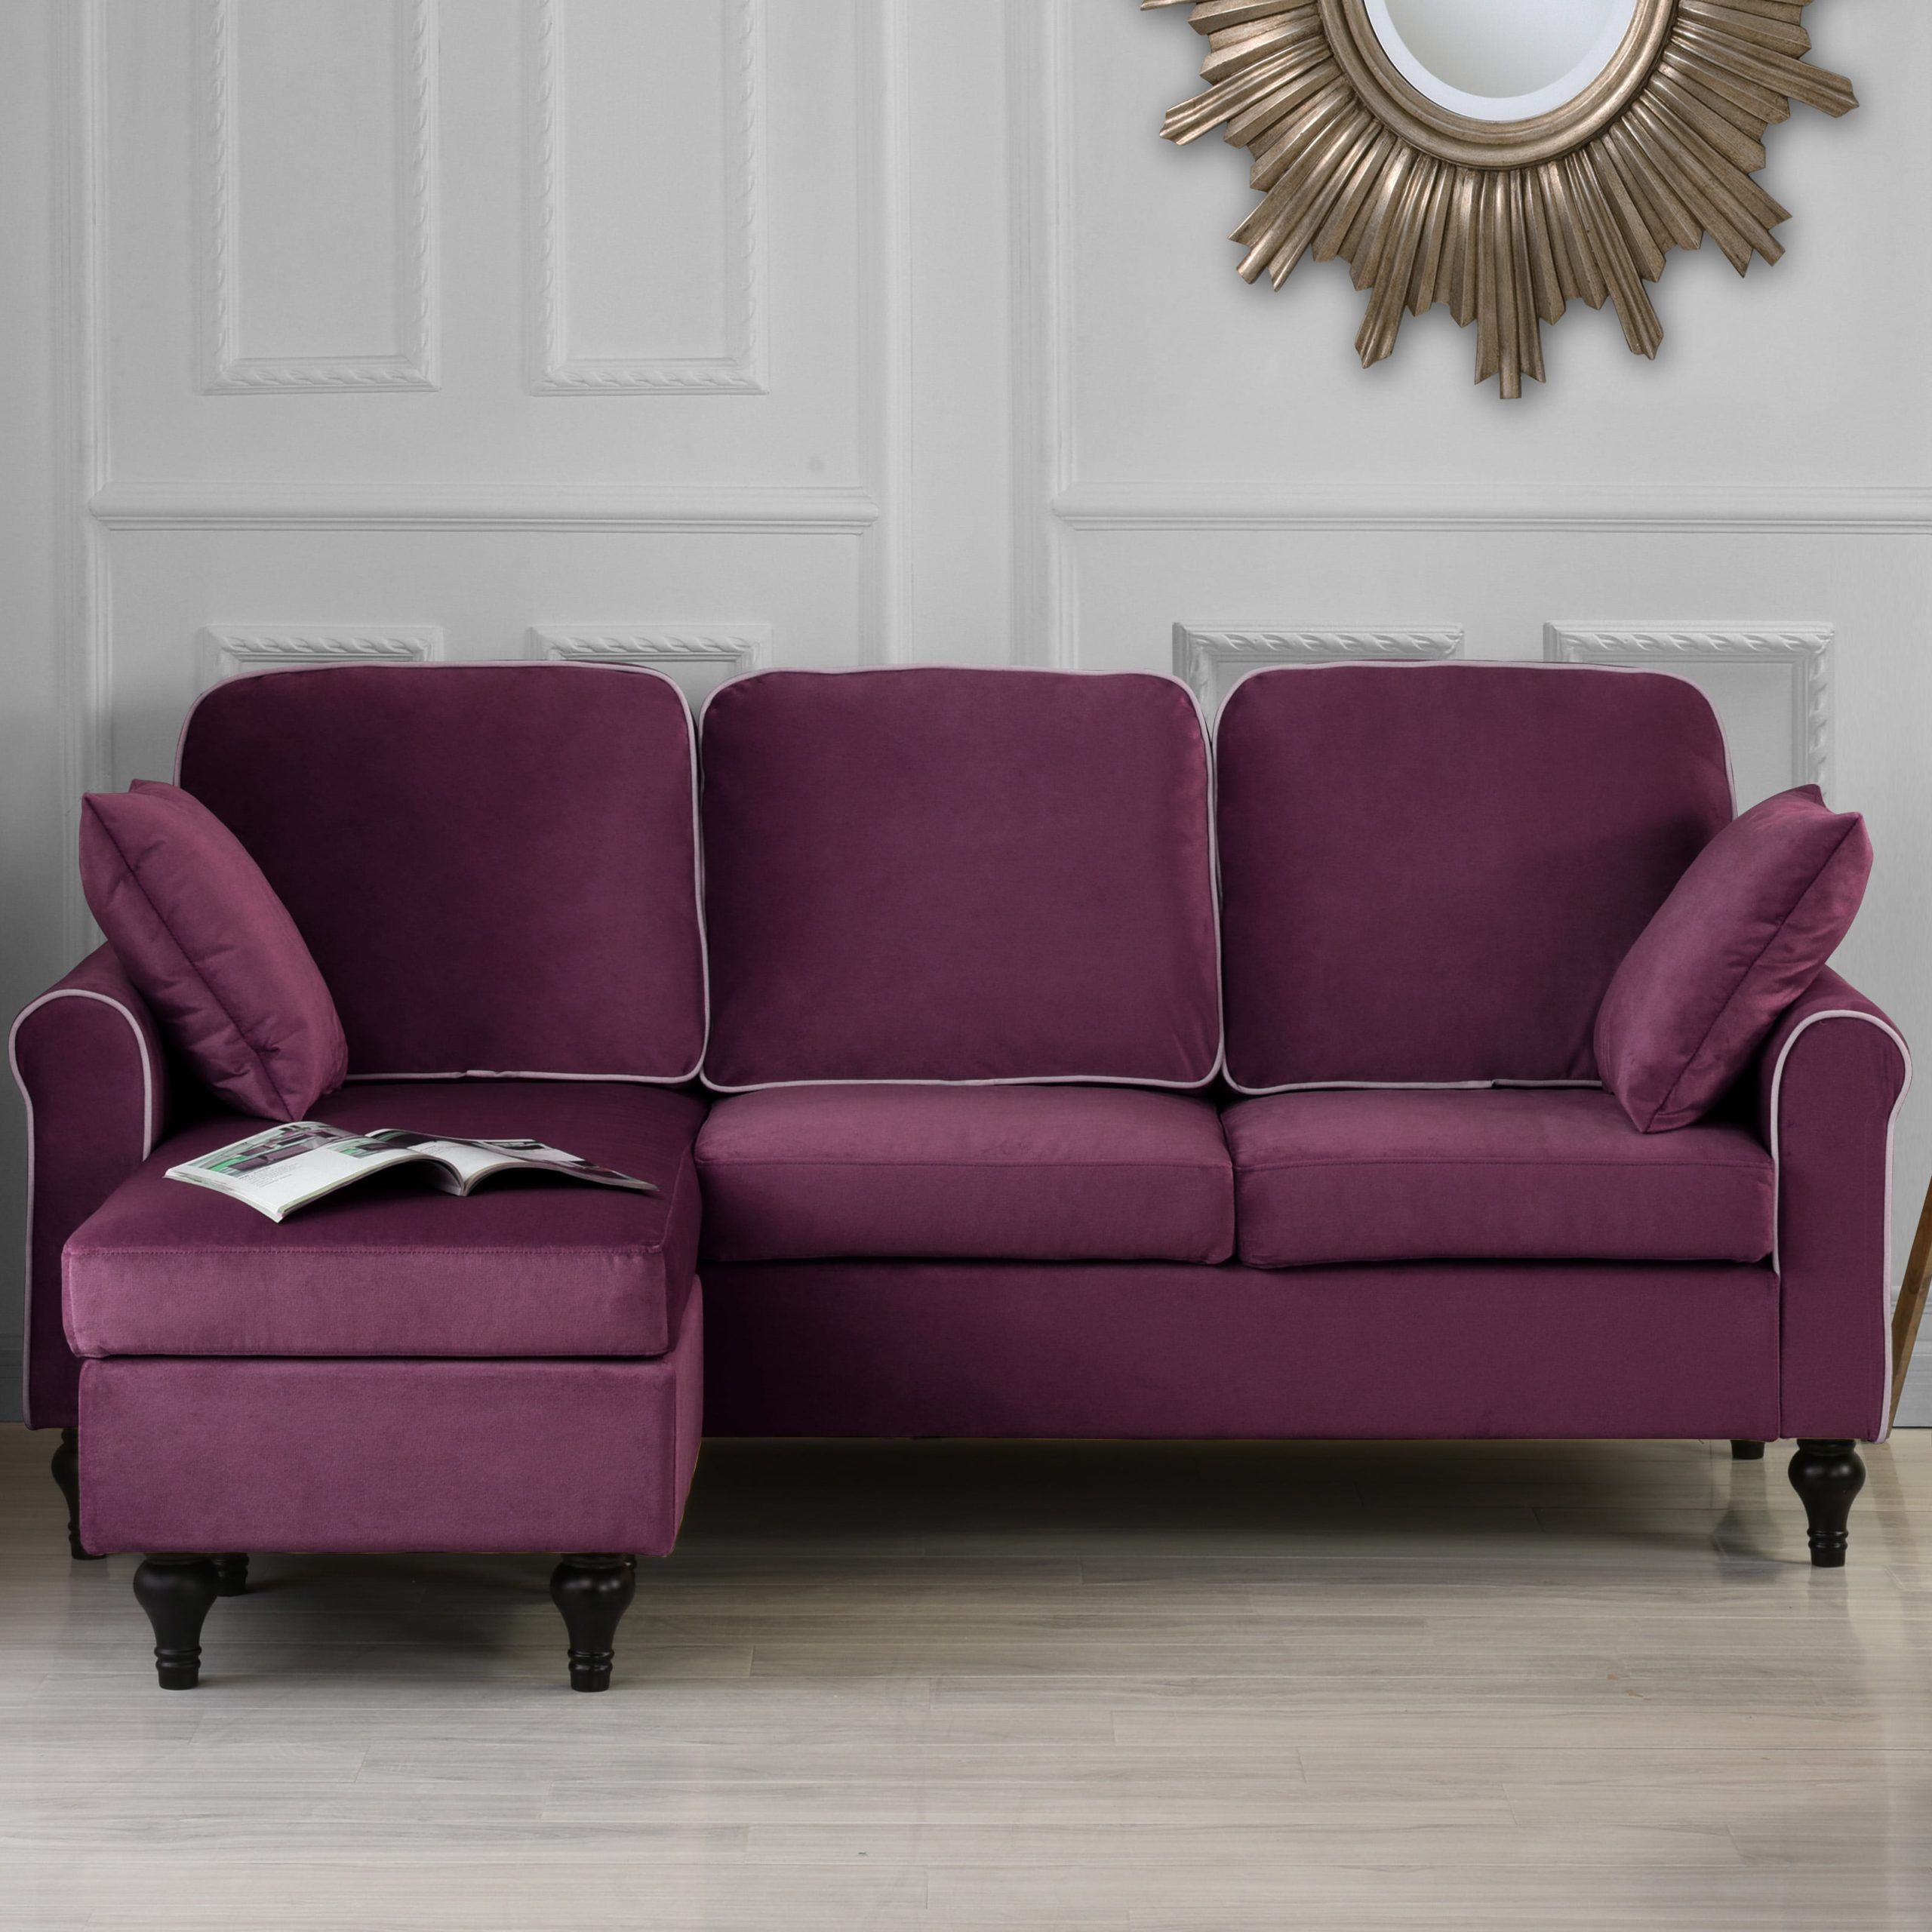 Classic And Traditional Small Space Velvet Sectional Sofa With With Regard To Sofas For Small Spaces (Gallery 3 of 20)